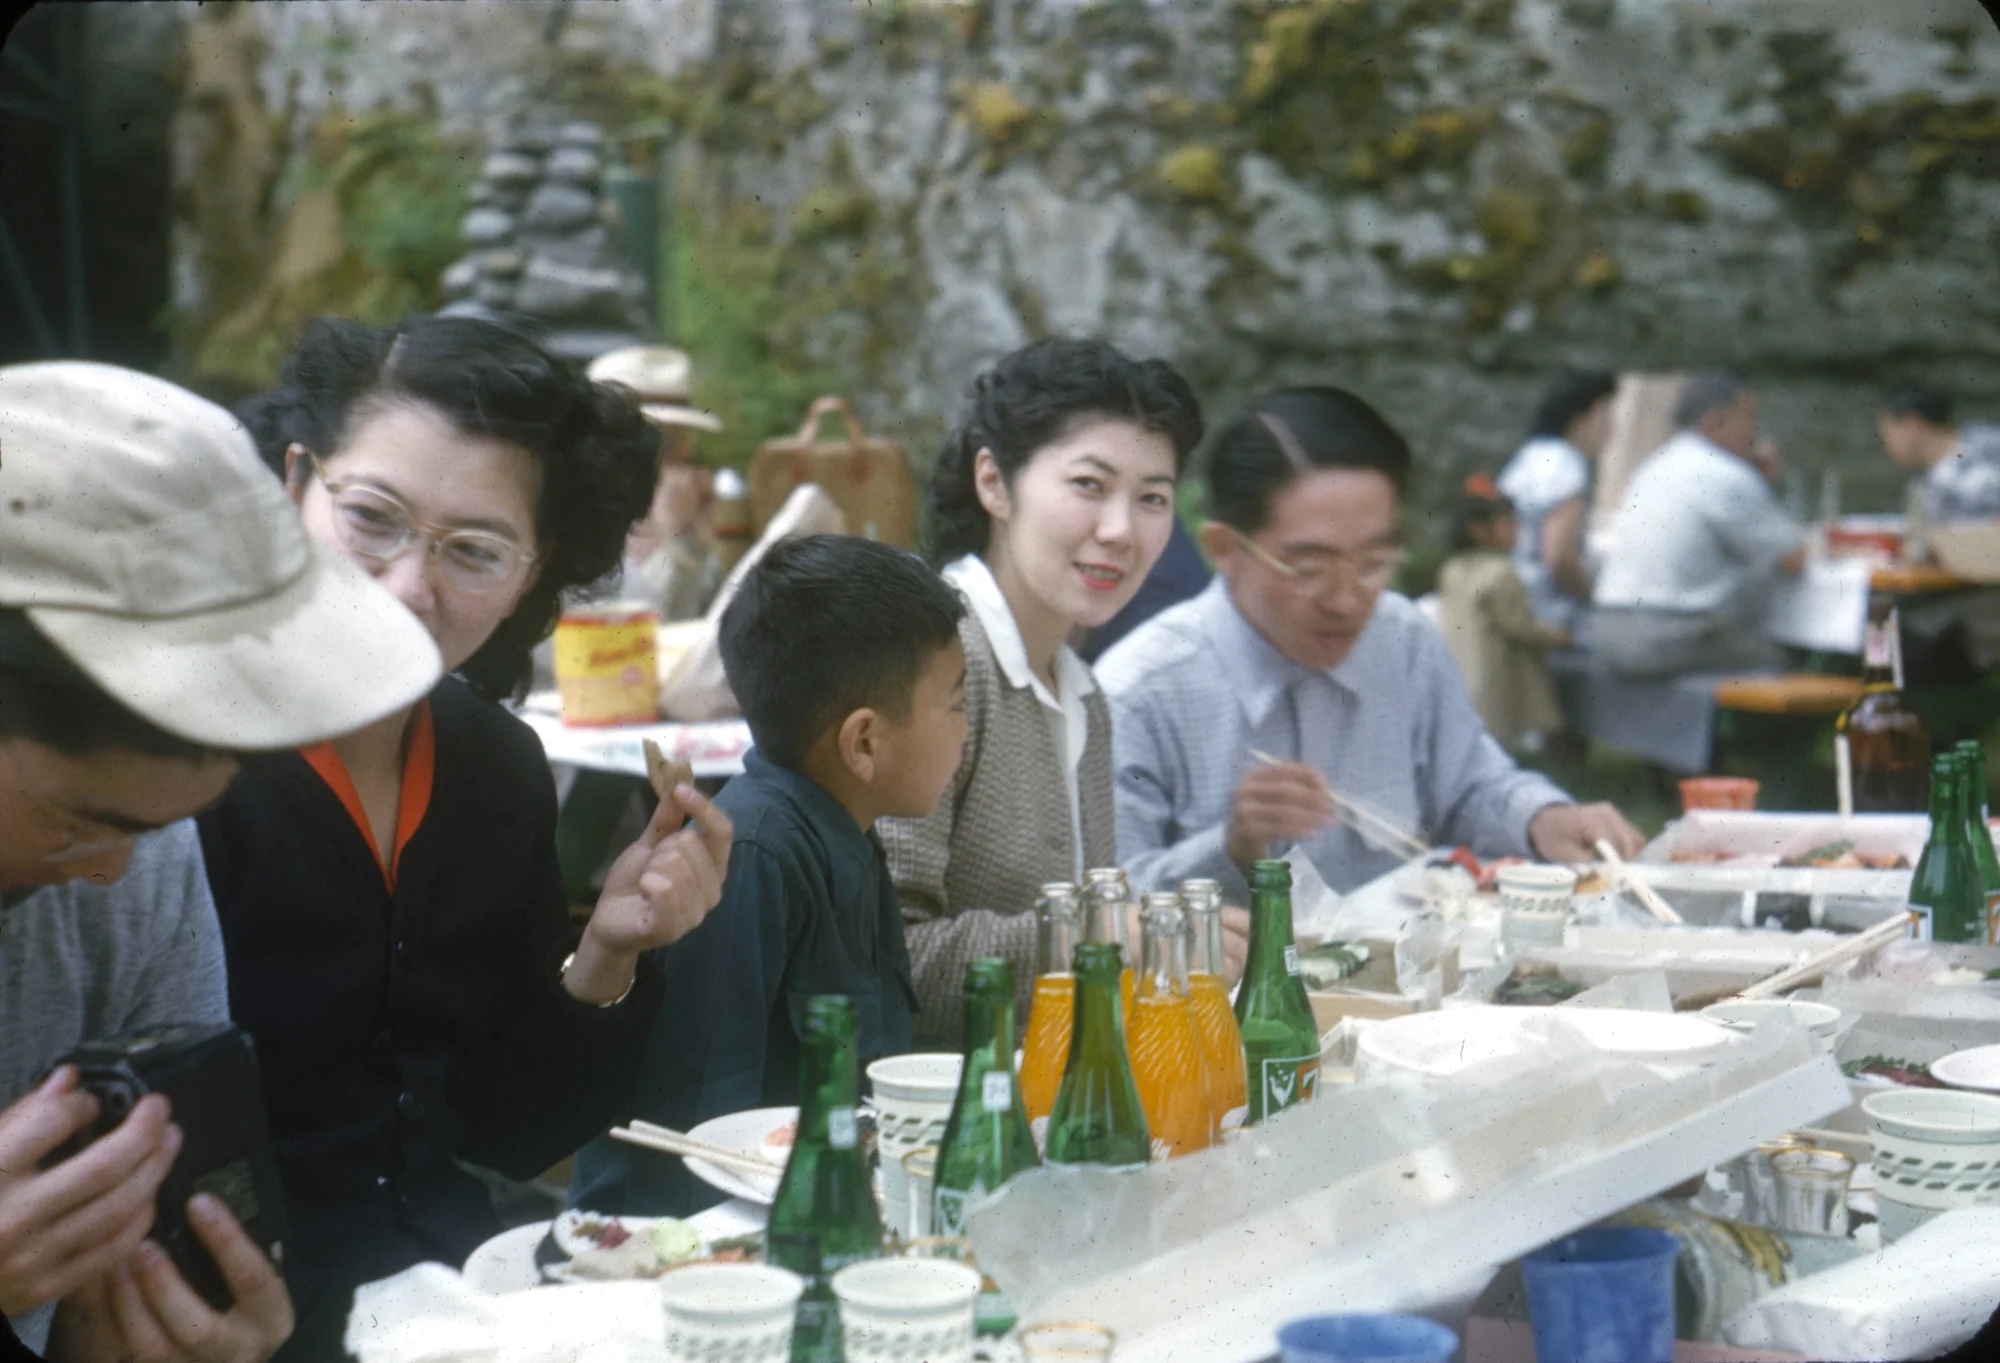 A group of people enjoying an outdoor gathering around a table filled with food and drinks, with one woman smiling towards the camera while the others are engaged in conversation.